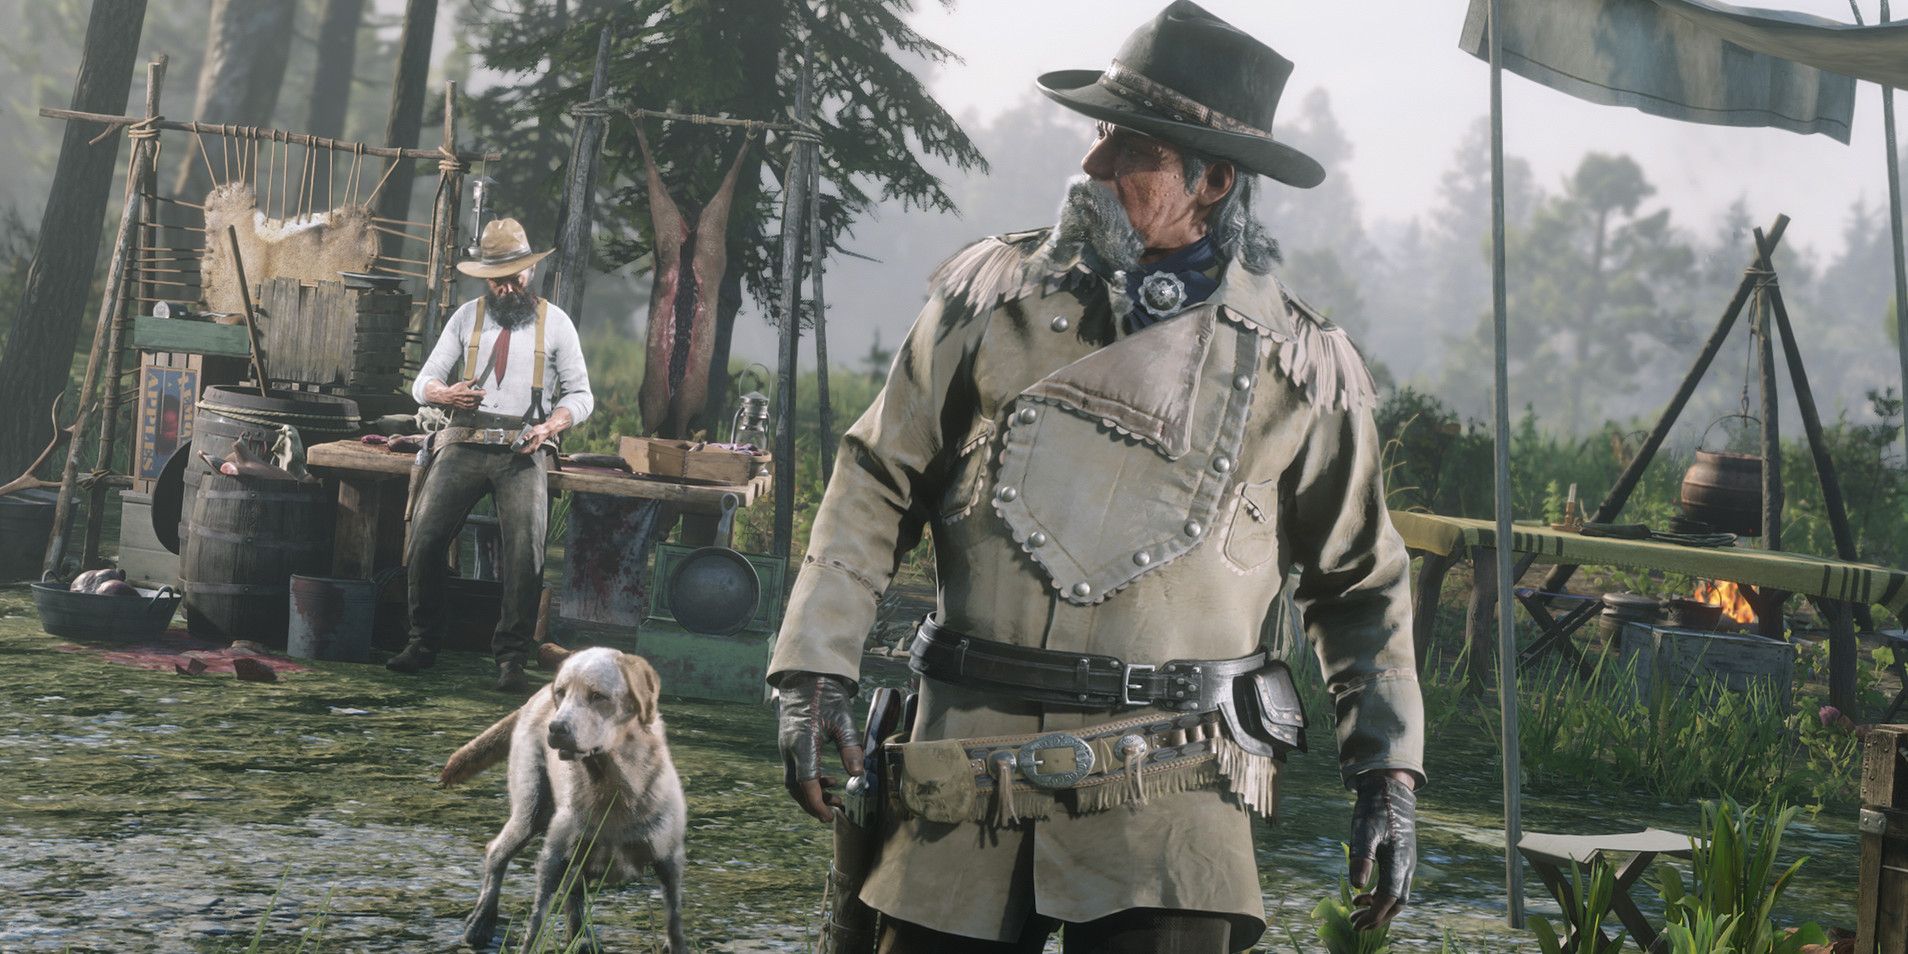 RDO Trader in camp with dog